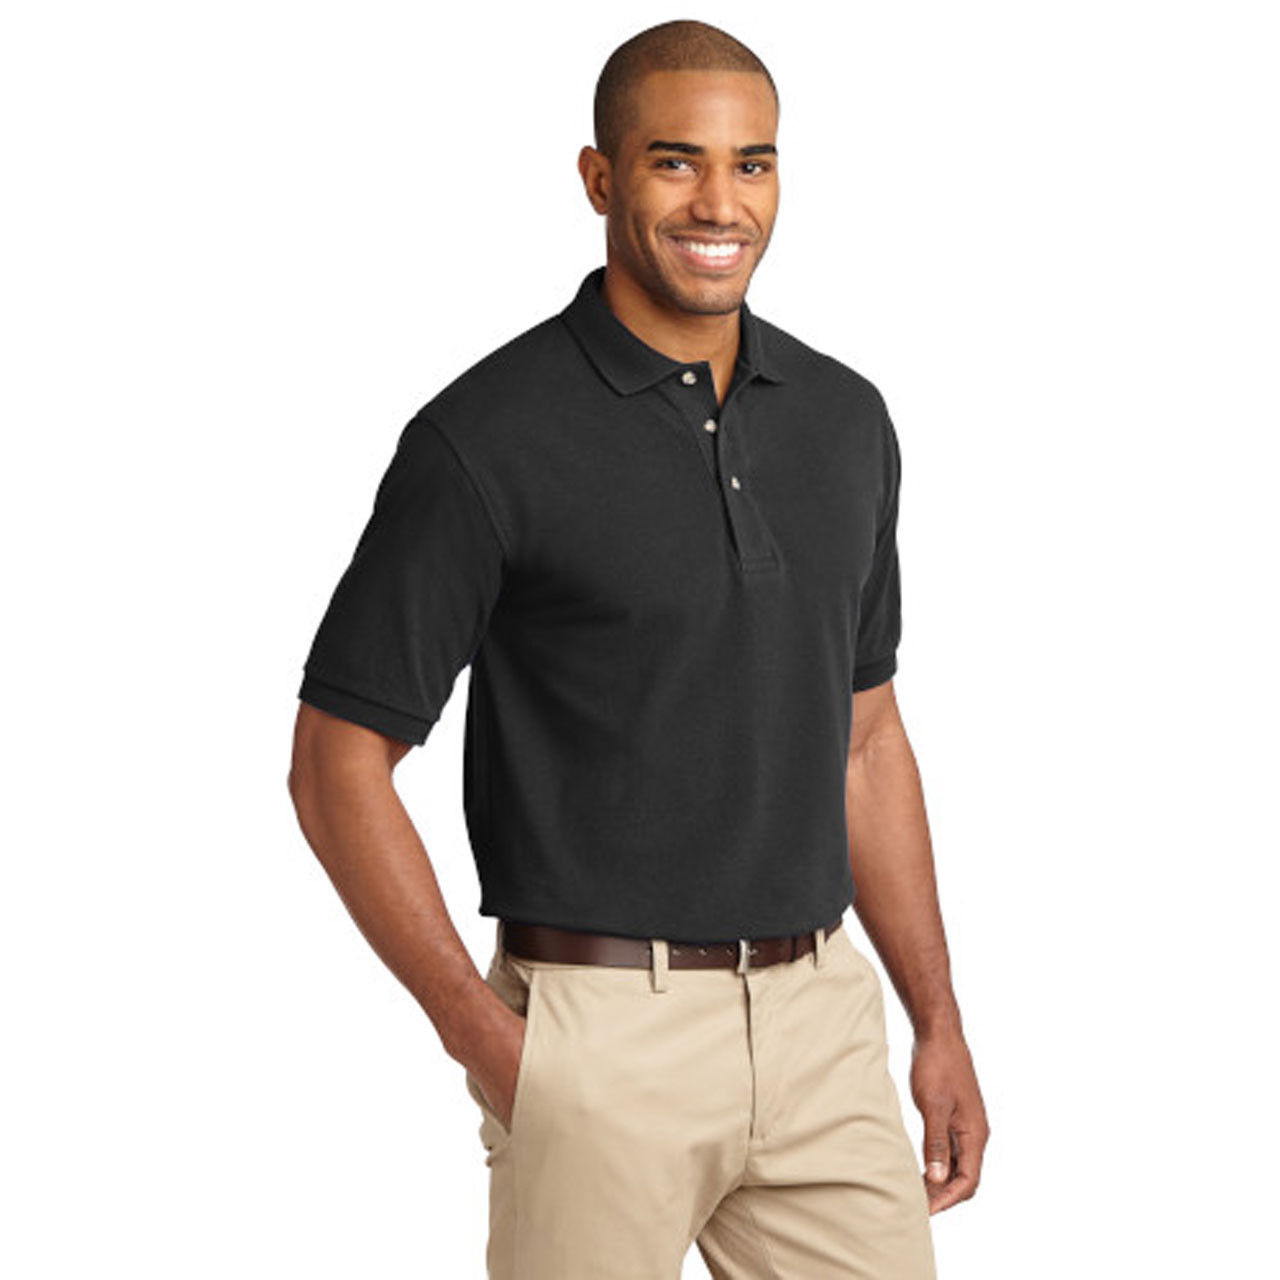 Is the boxercraft wholesale polo s made of pique fabric?